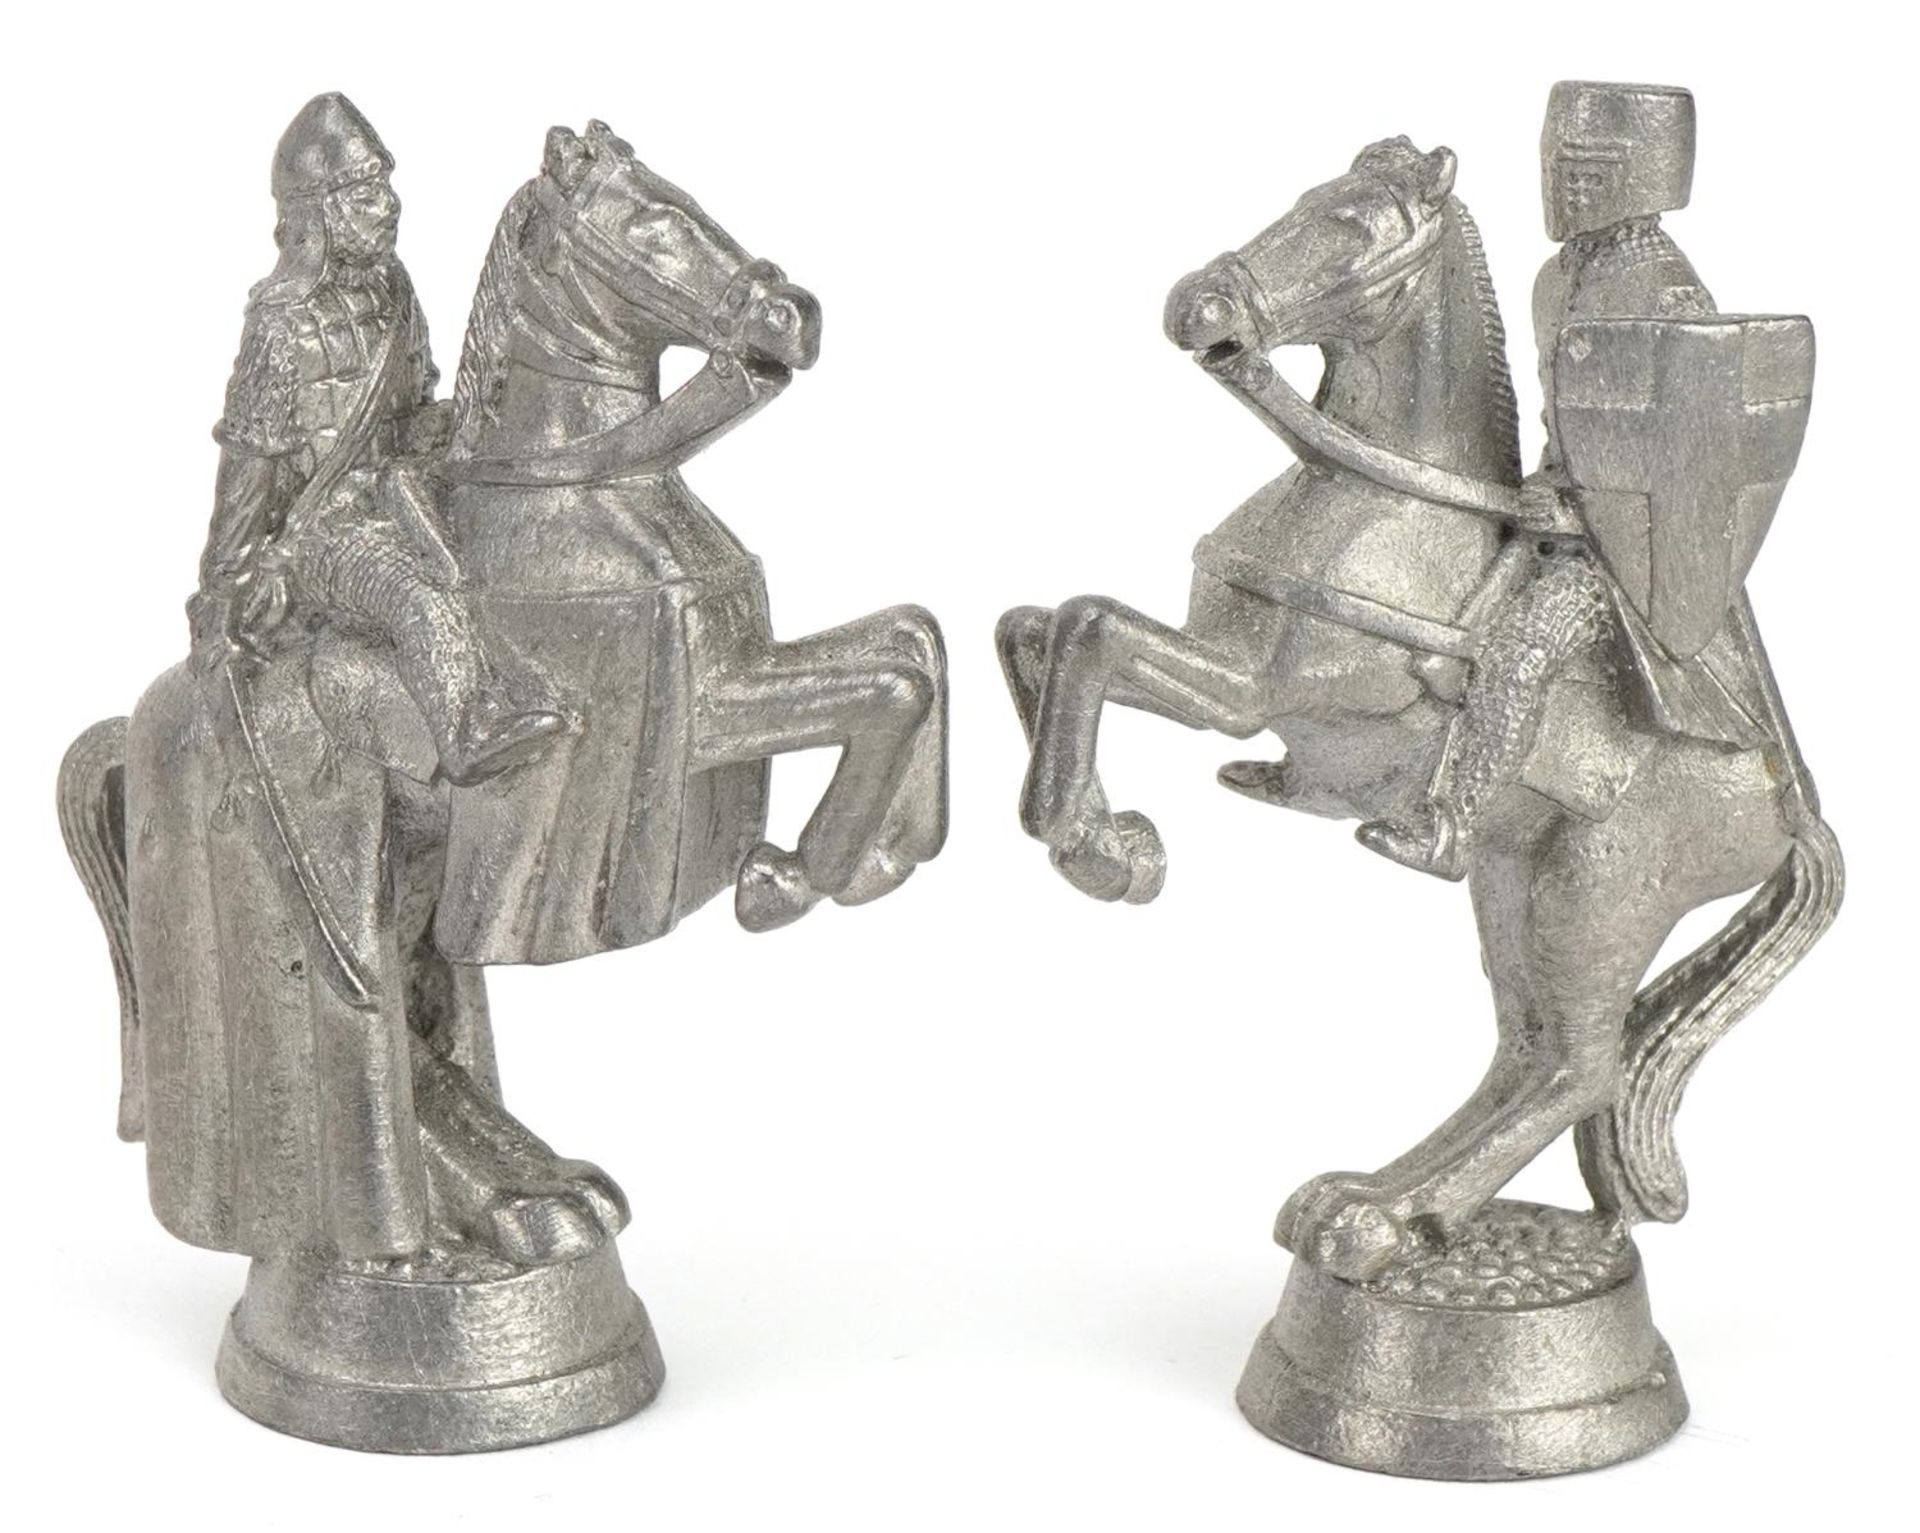 White metal medieval design chess set, the largest pieces 6.5cm high - Image 4 of 6